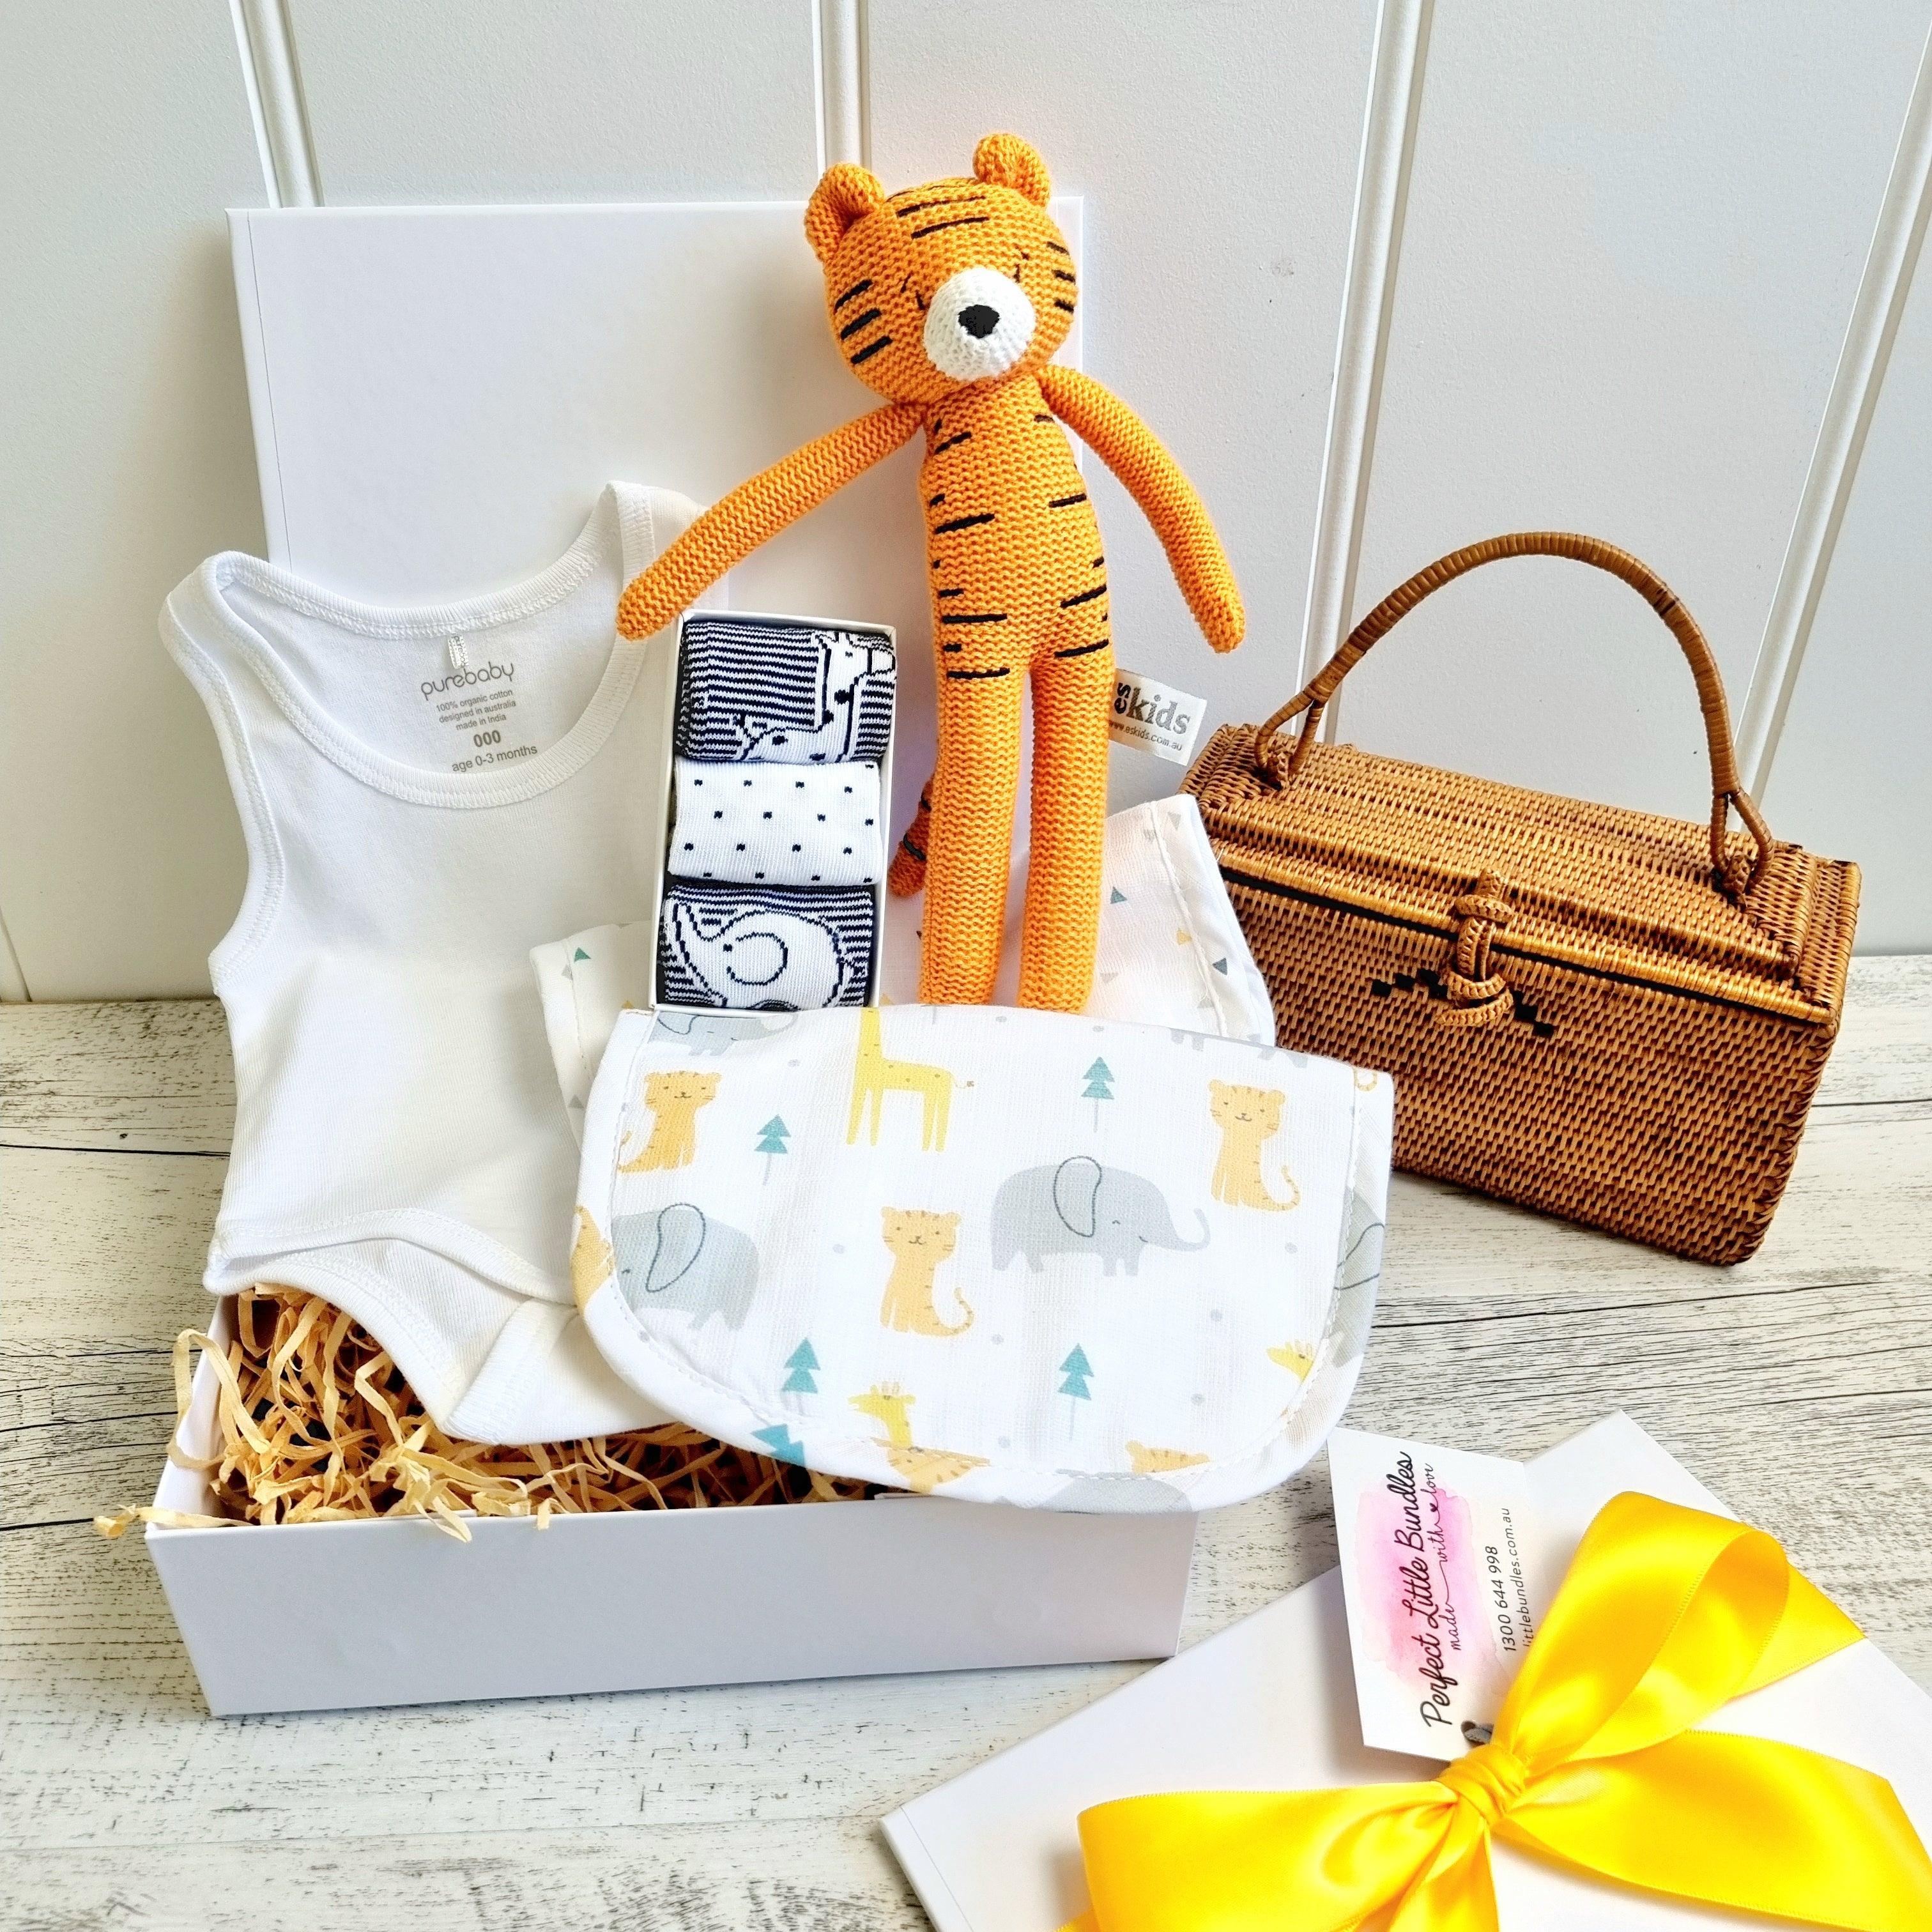 Baby Box Gifts | Melbourne VIC